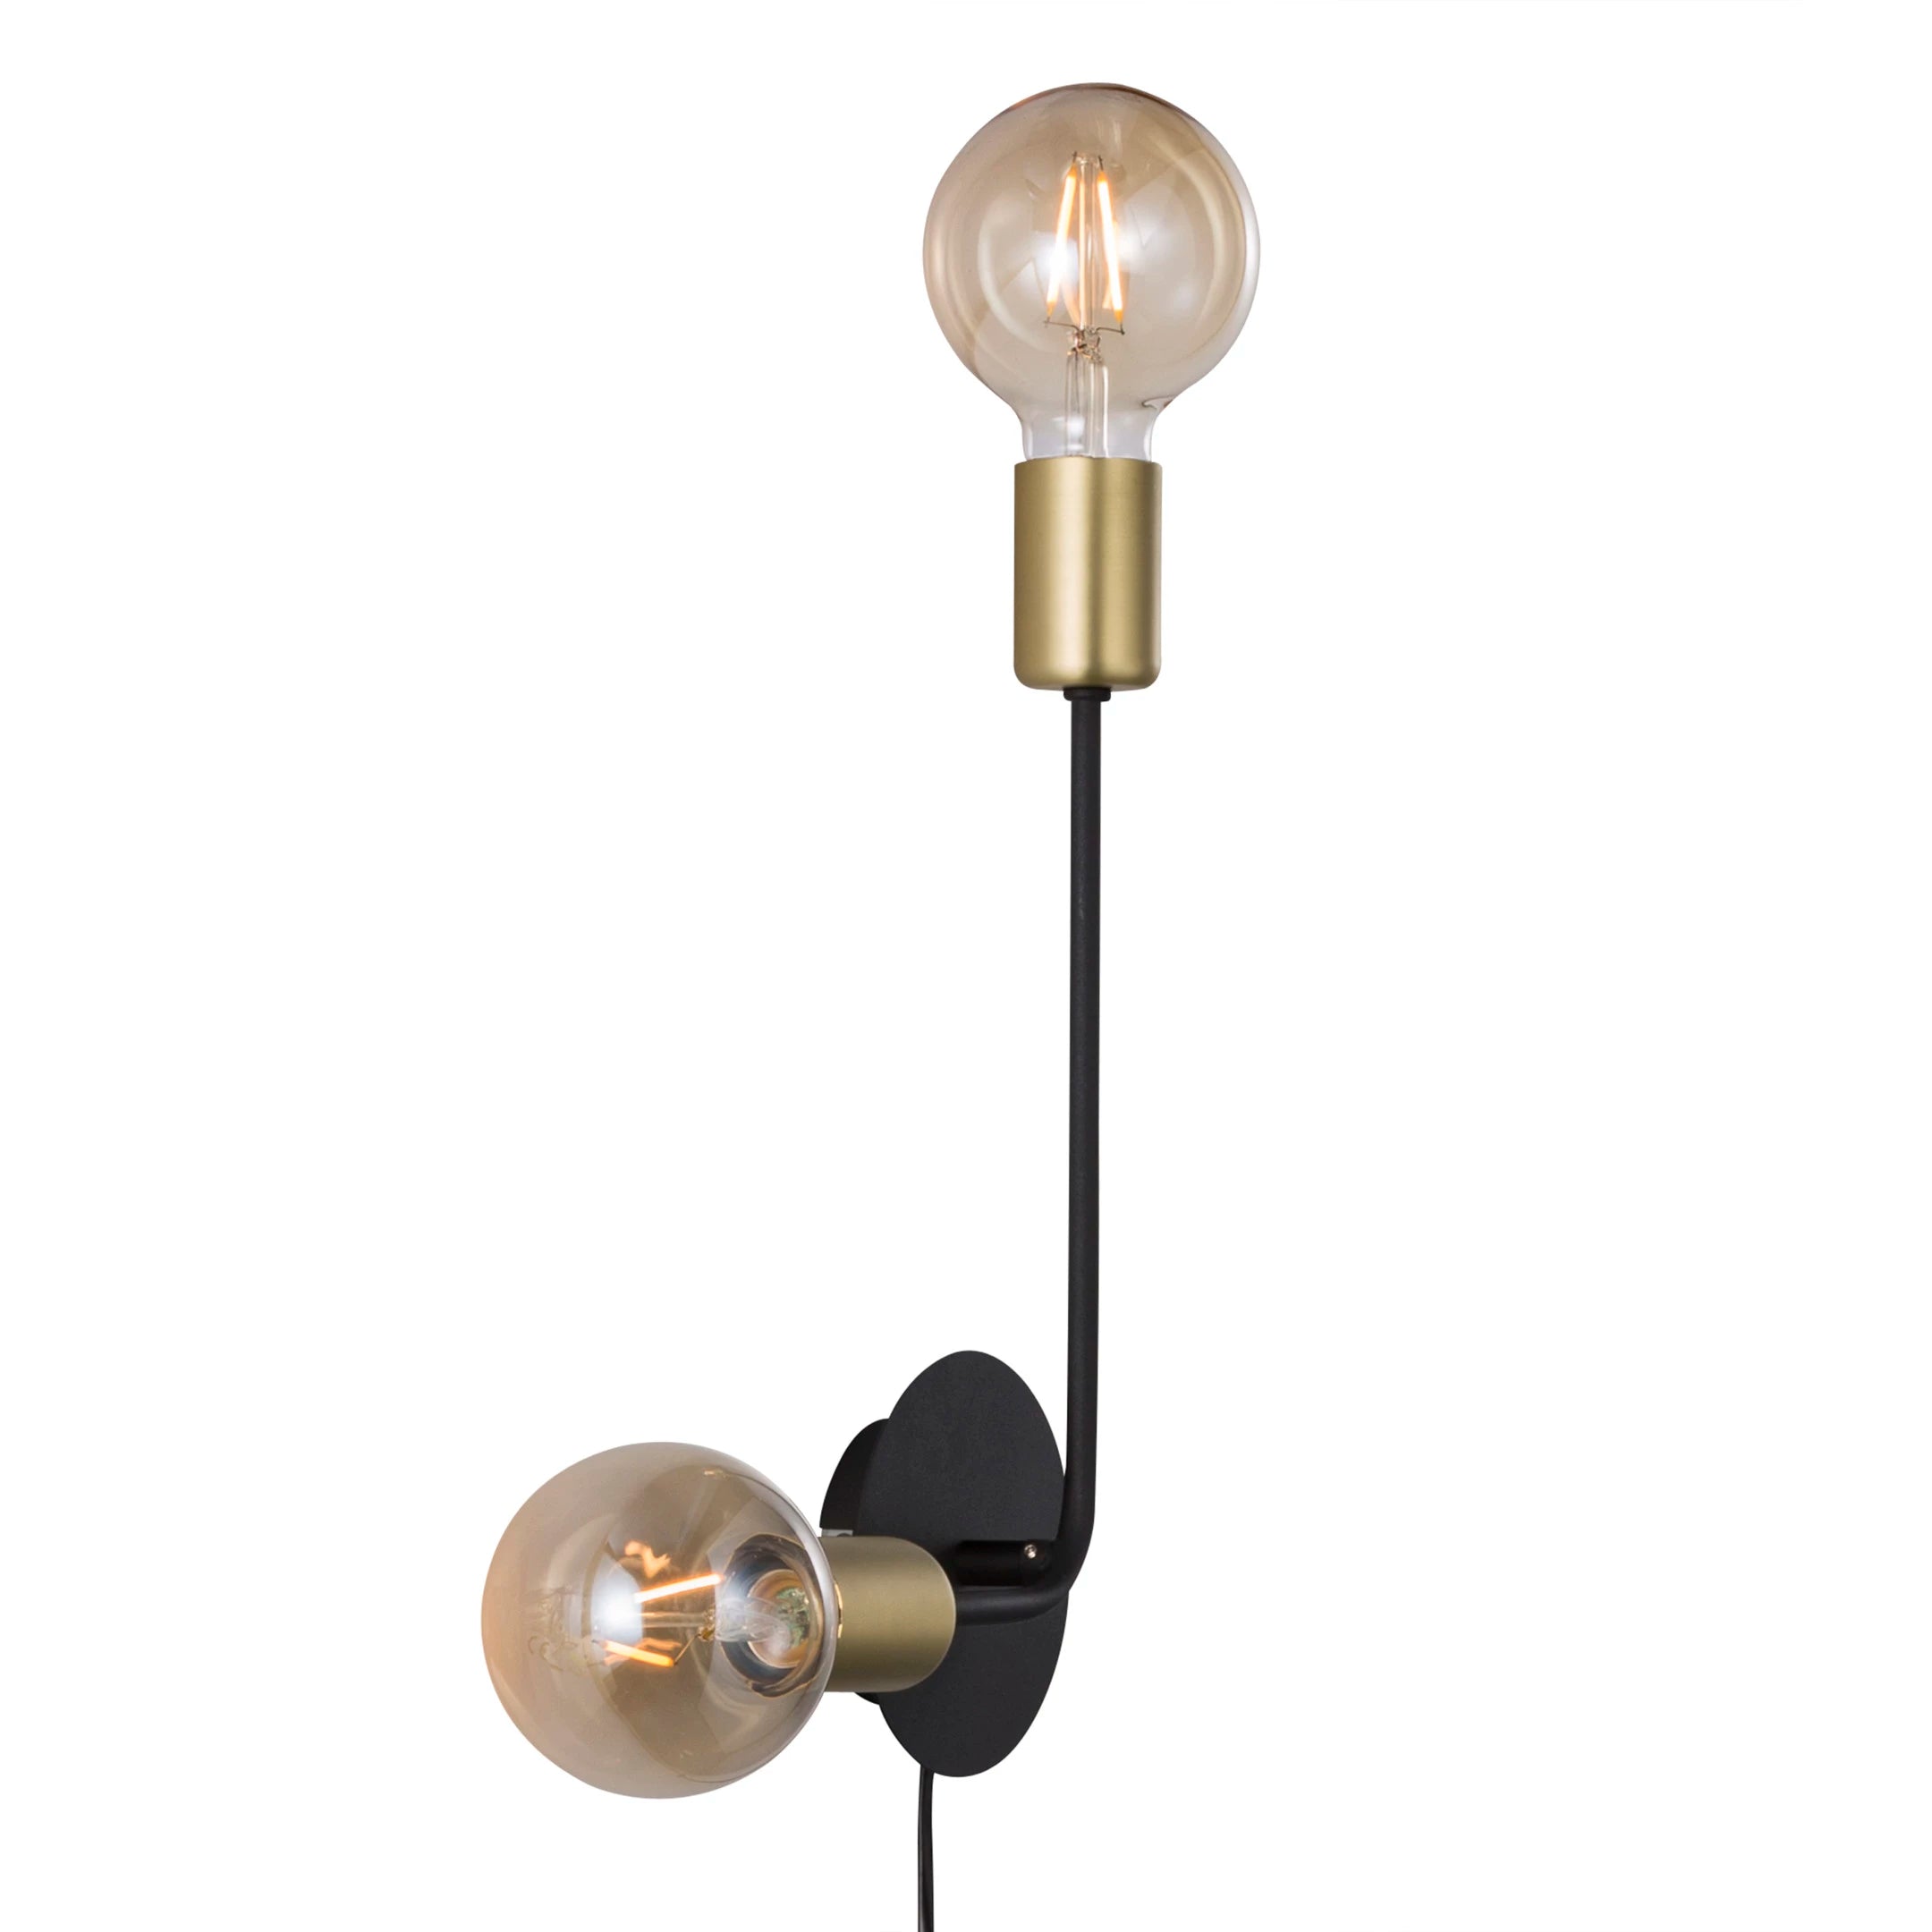 Wall lamp JOSEFINE black with gold details